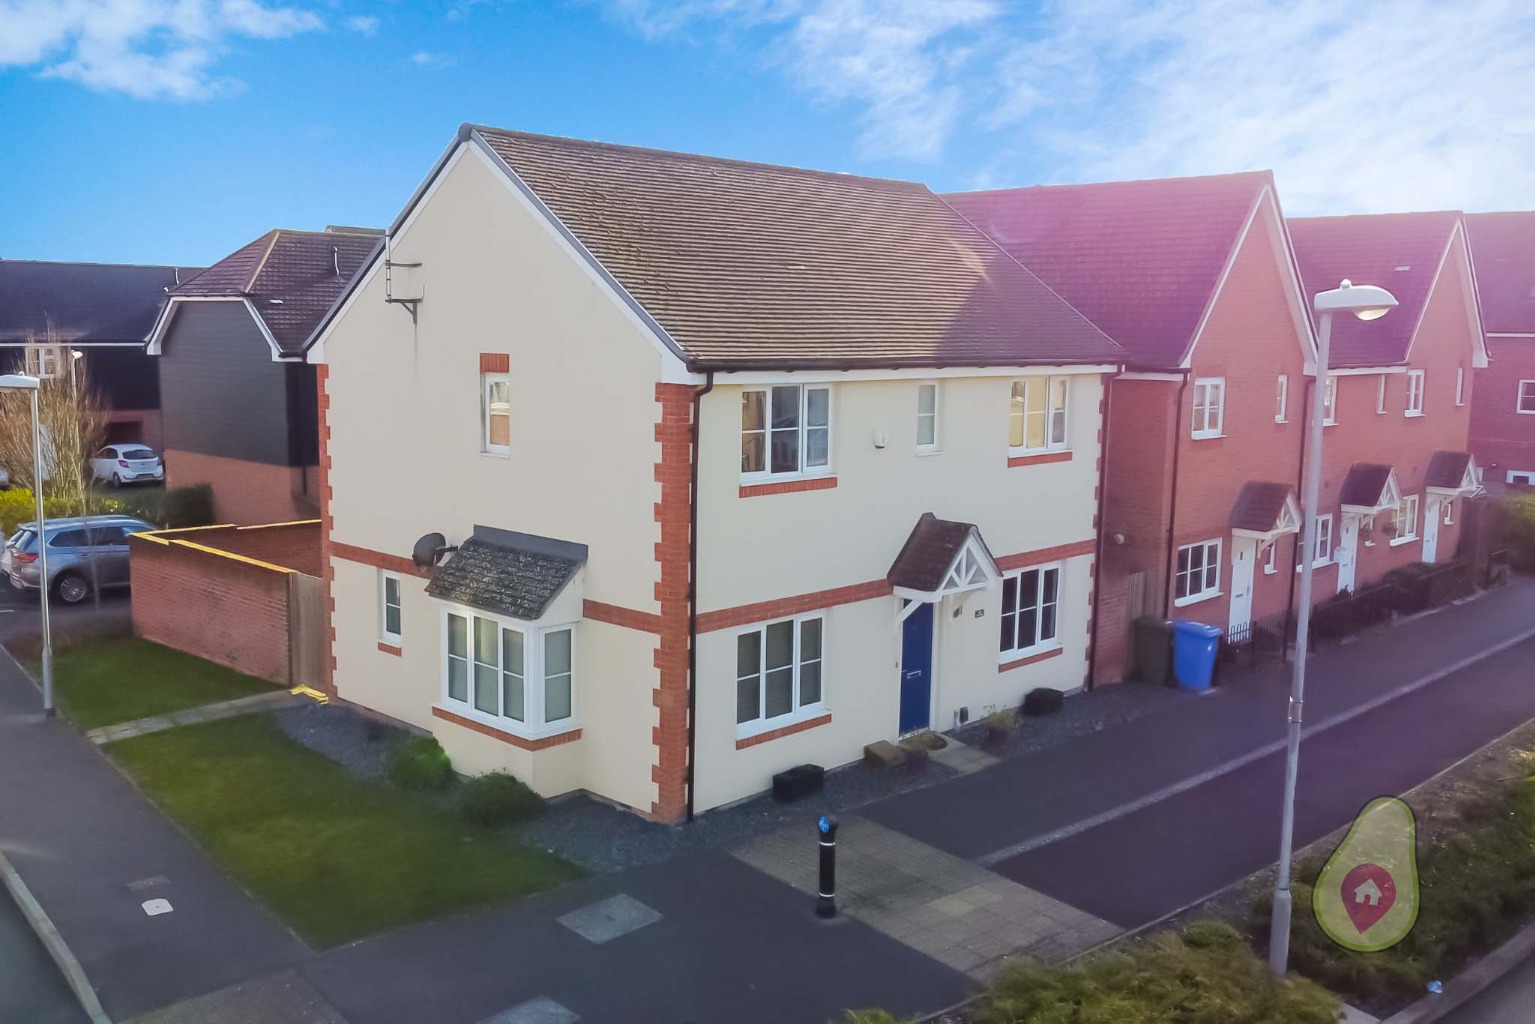 A beautifully presented detached four bedroom family home, offering flexible living spaces and generous sized rooms. The added benefit of a south facing corner plot garden, a car port and three parking spaces in total mean this one won't hang around for long.